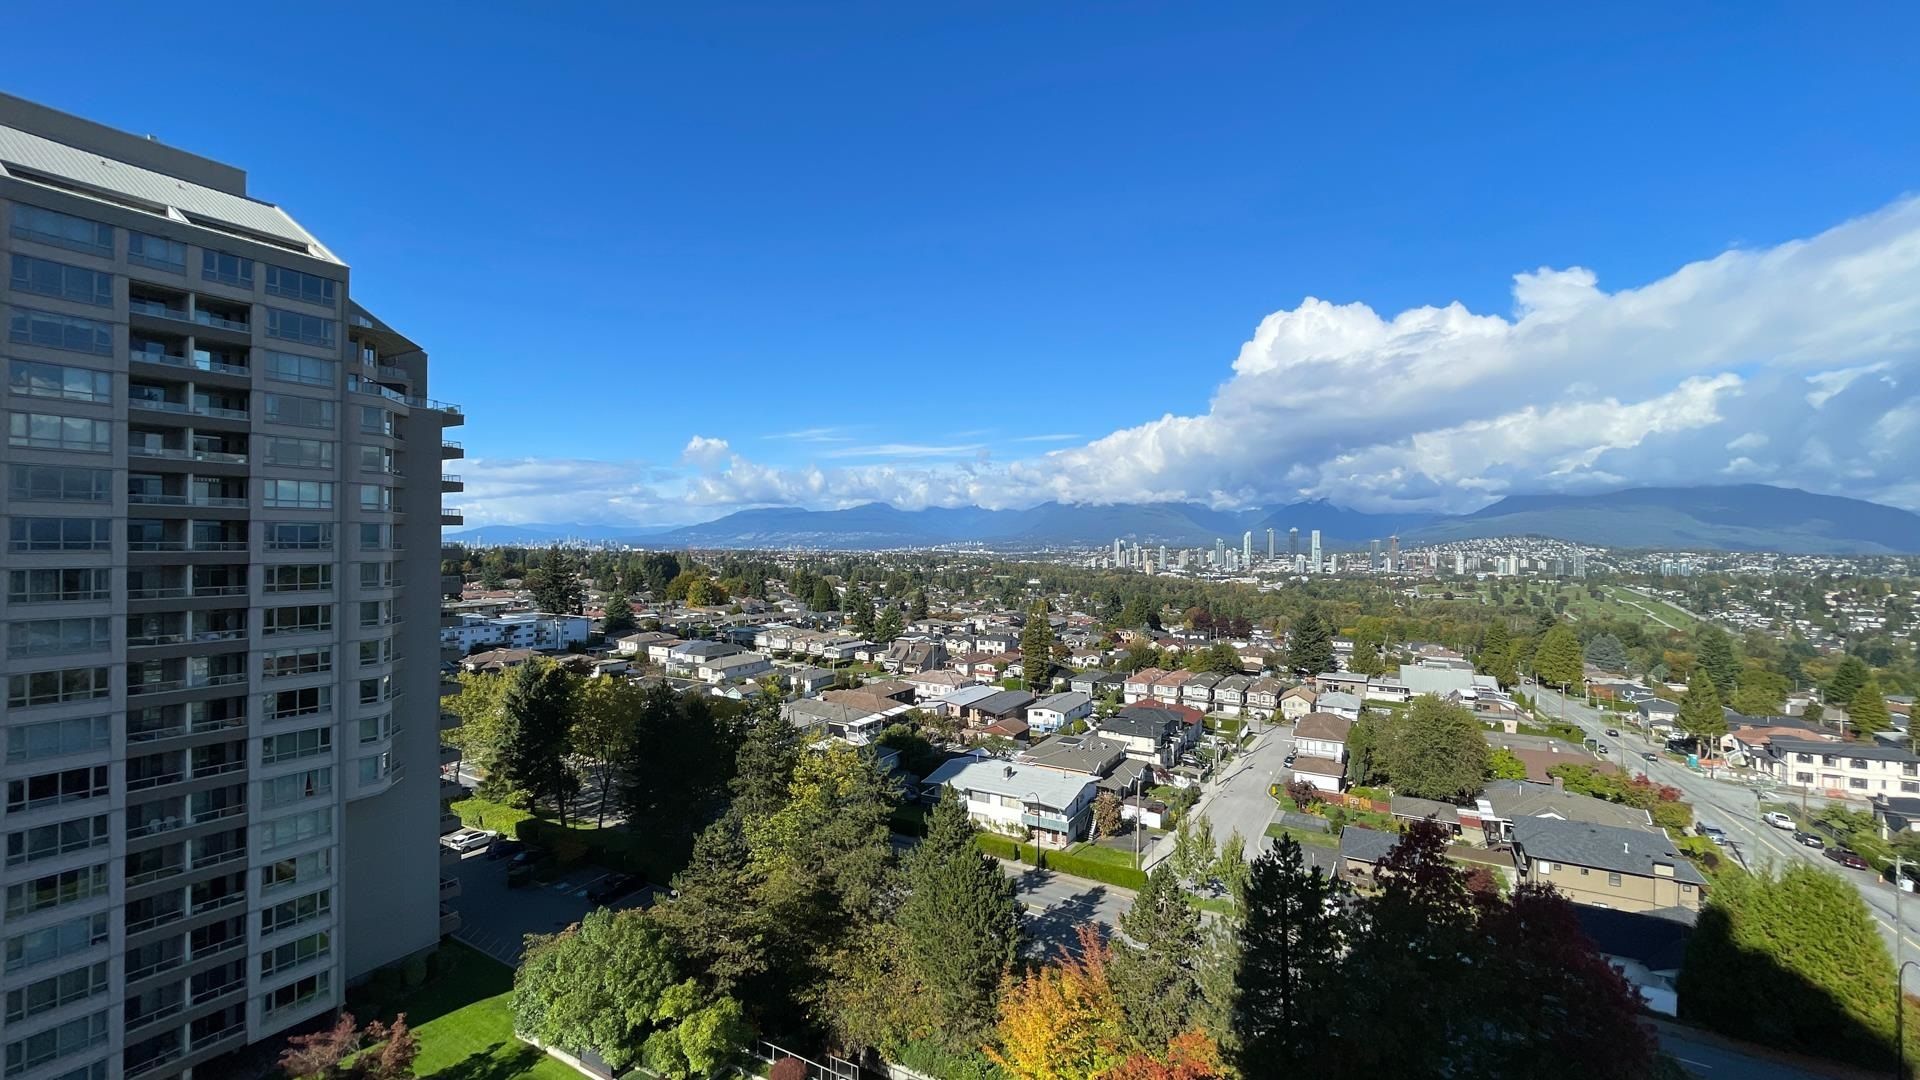 Main Photo: 1404 6055 NELSON AVENUE in Burnaby: Forest Glen BS Condo for sale (Burnaby South)  : MLS®# R2624663